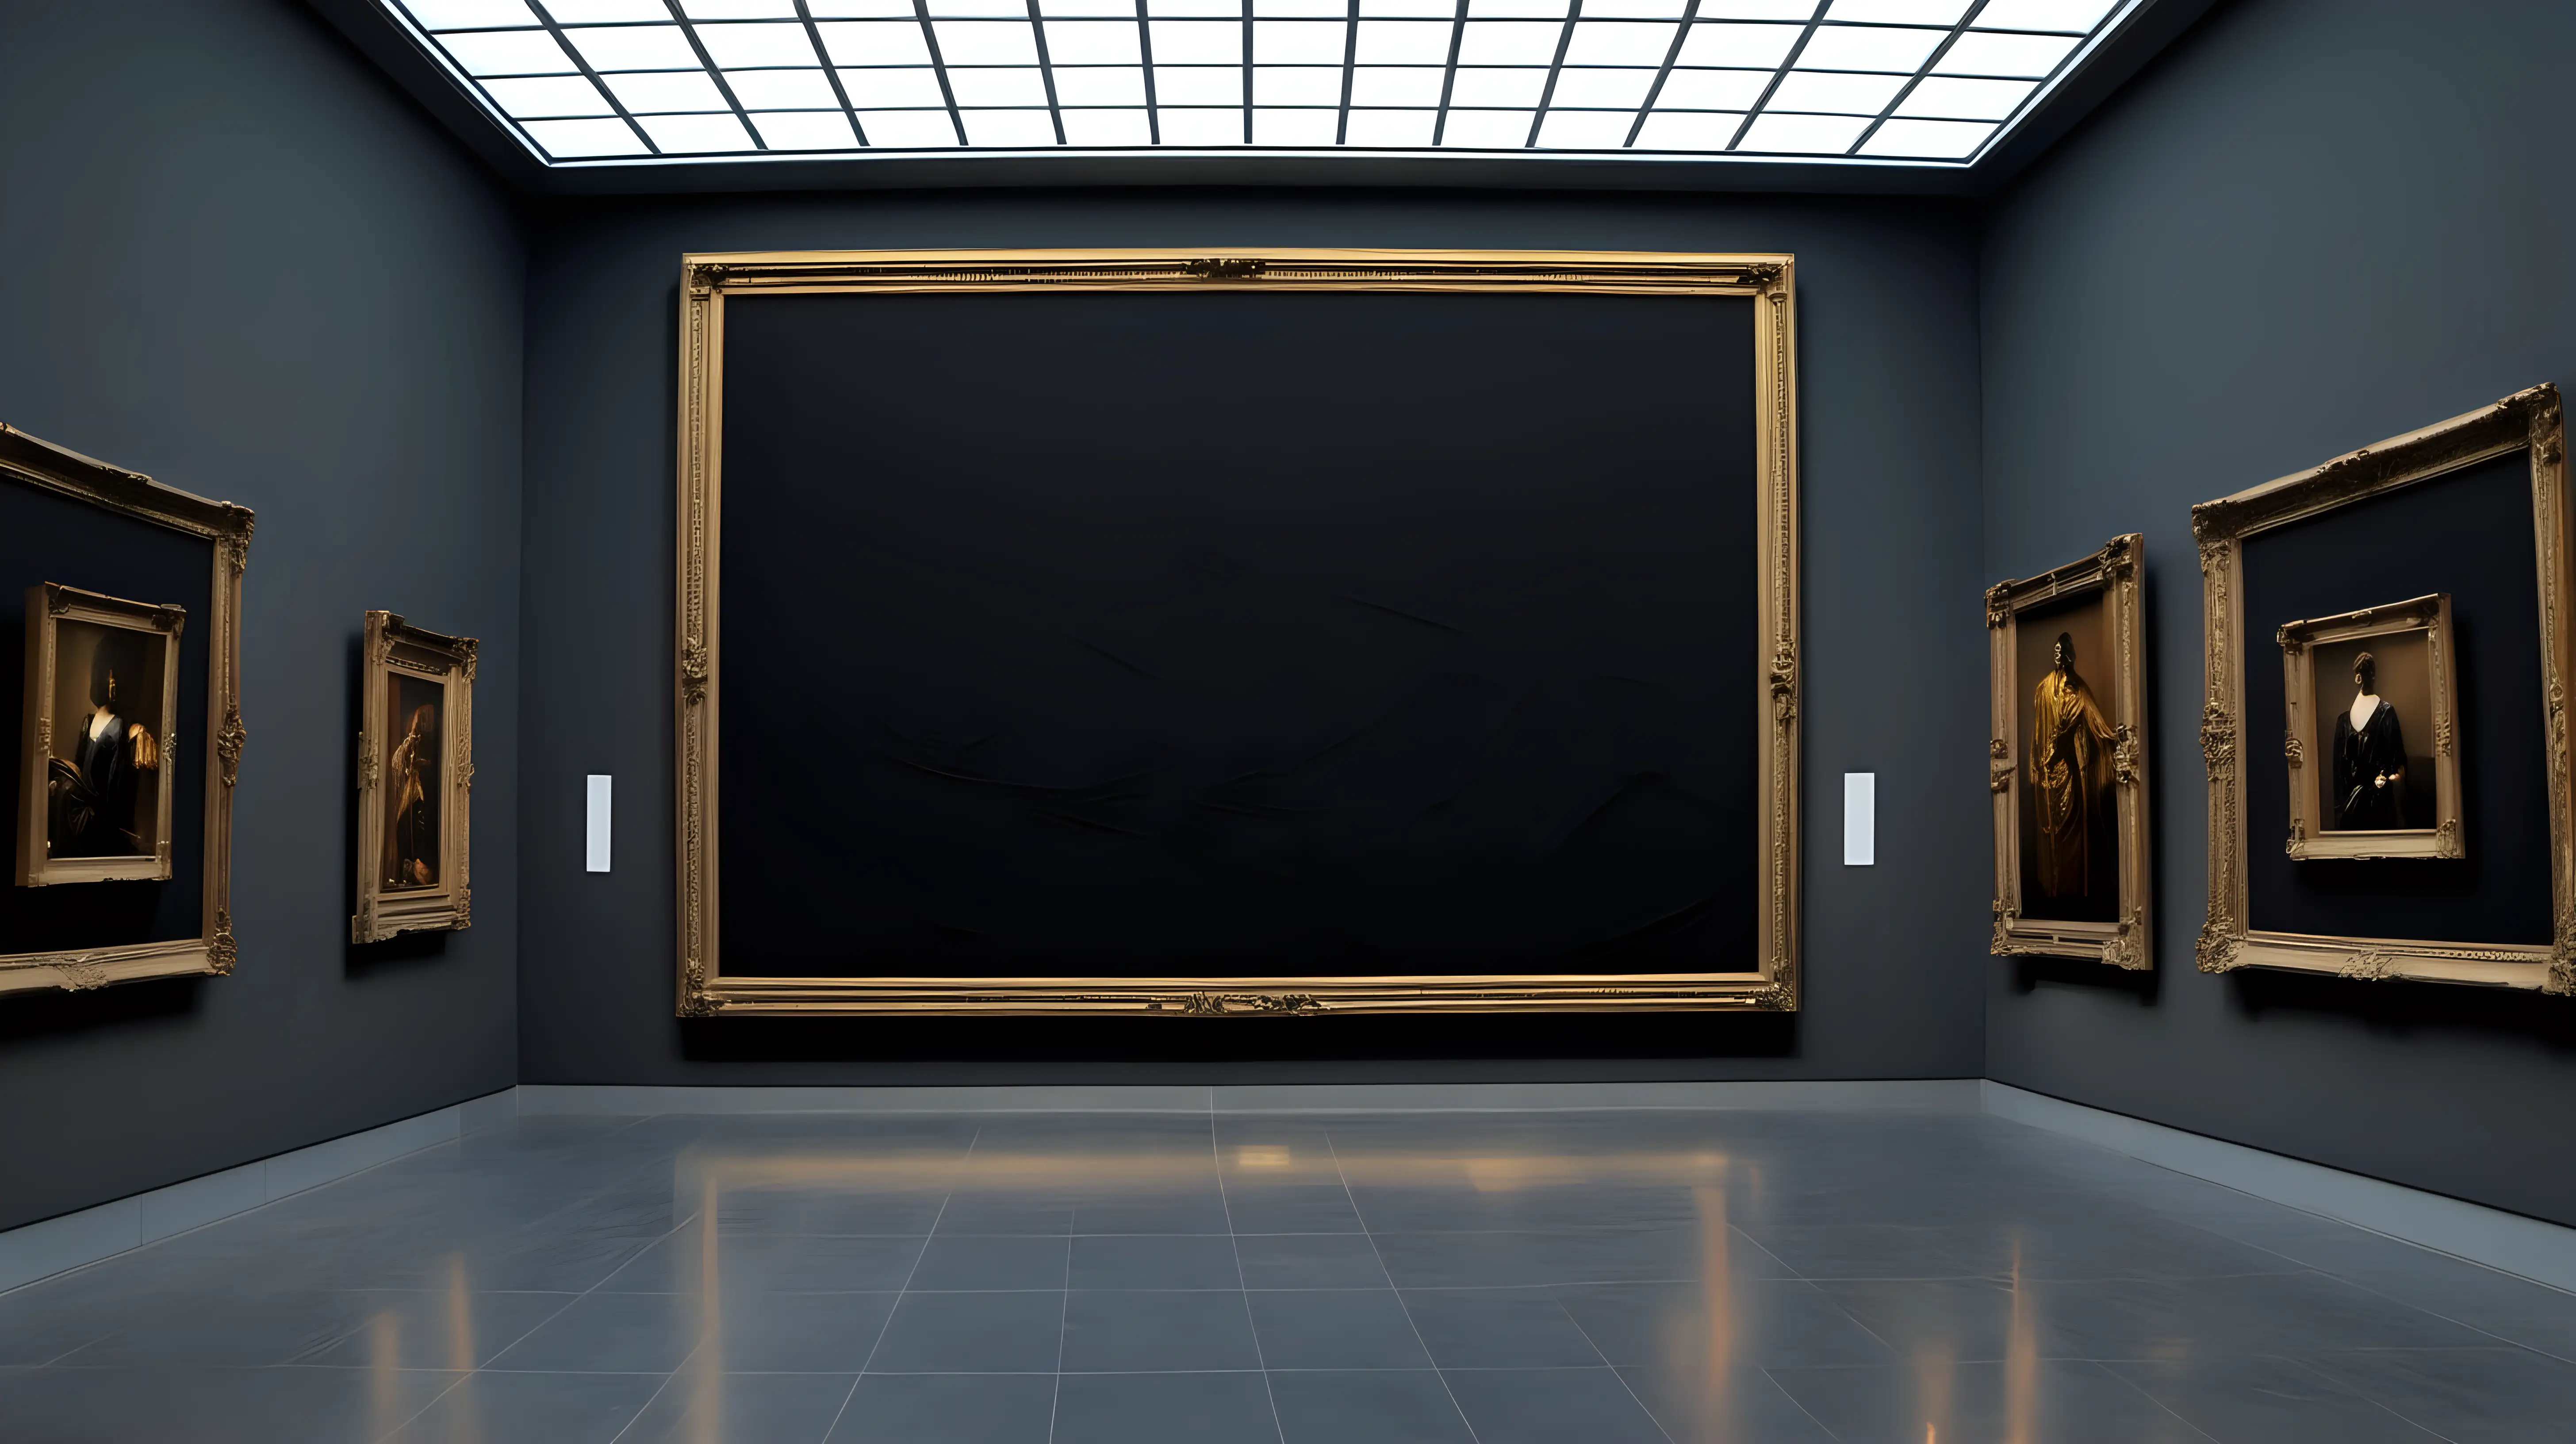 Art Museum with empty walls except for one giant, gold framed black canvas